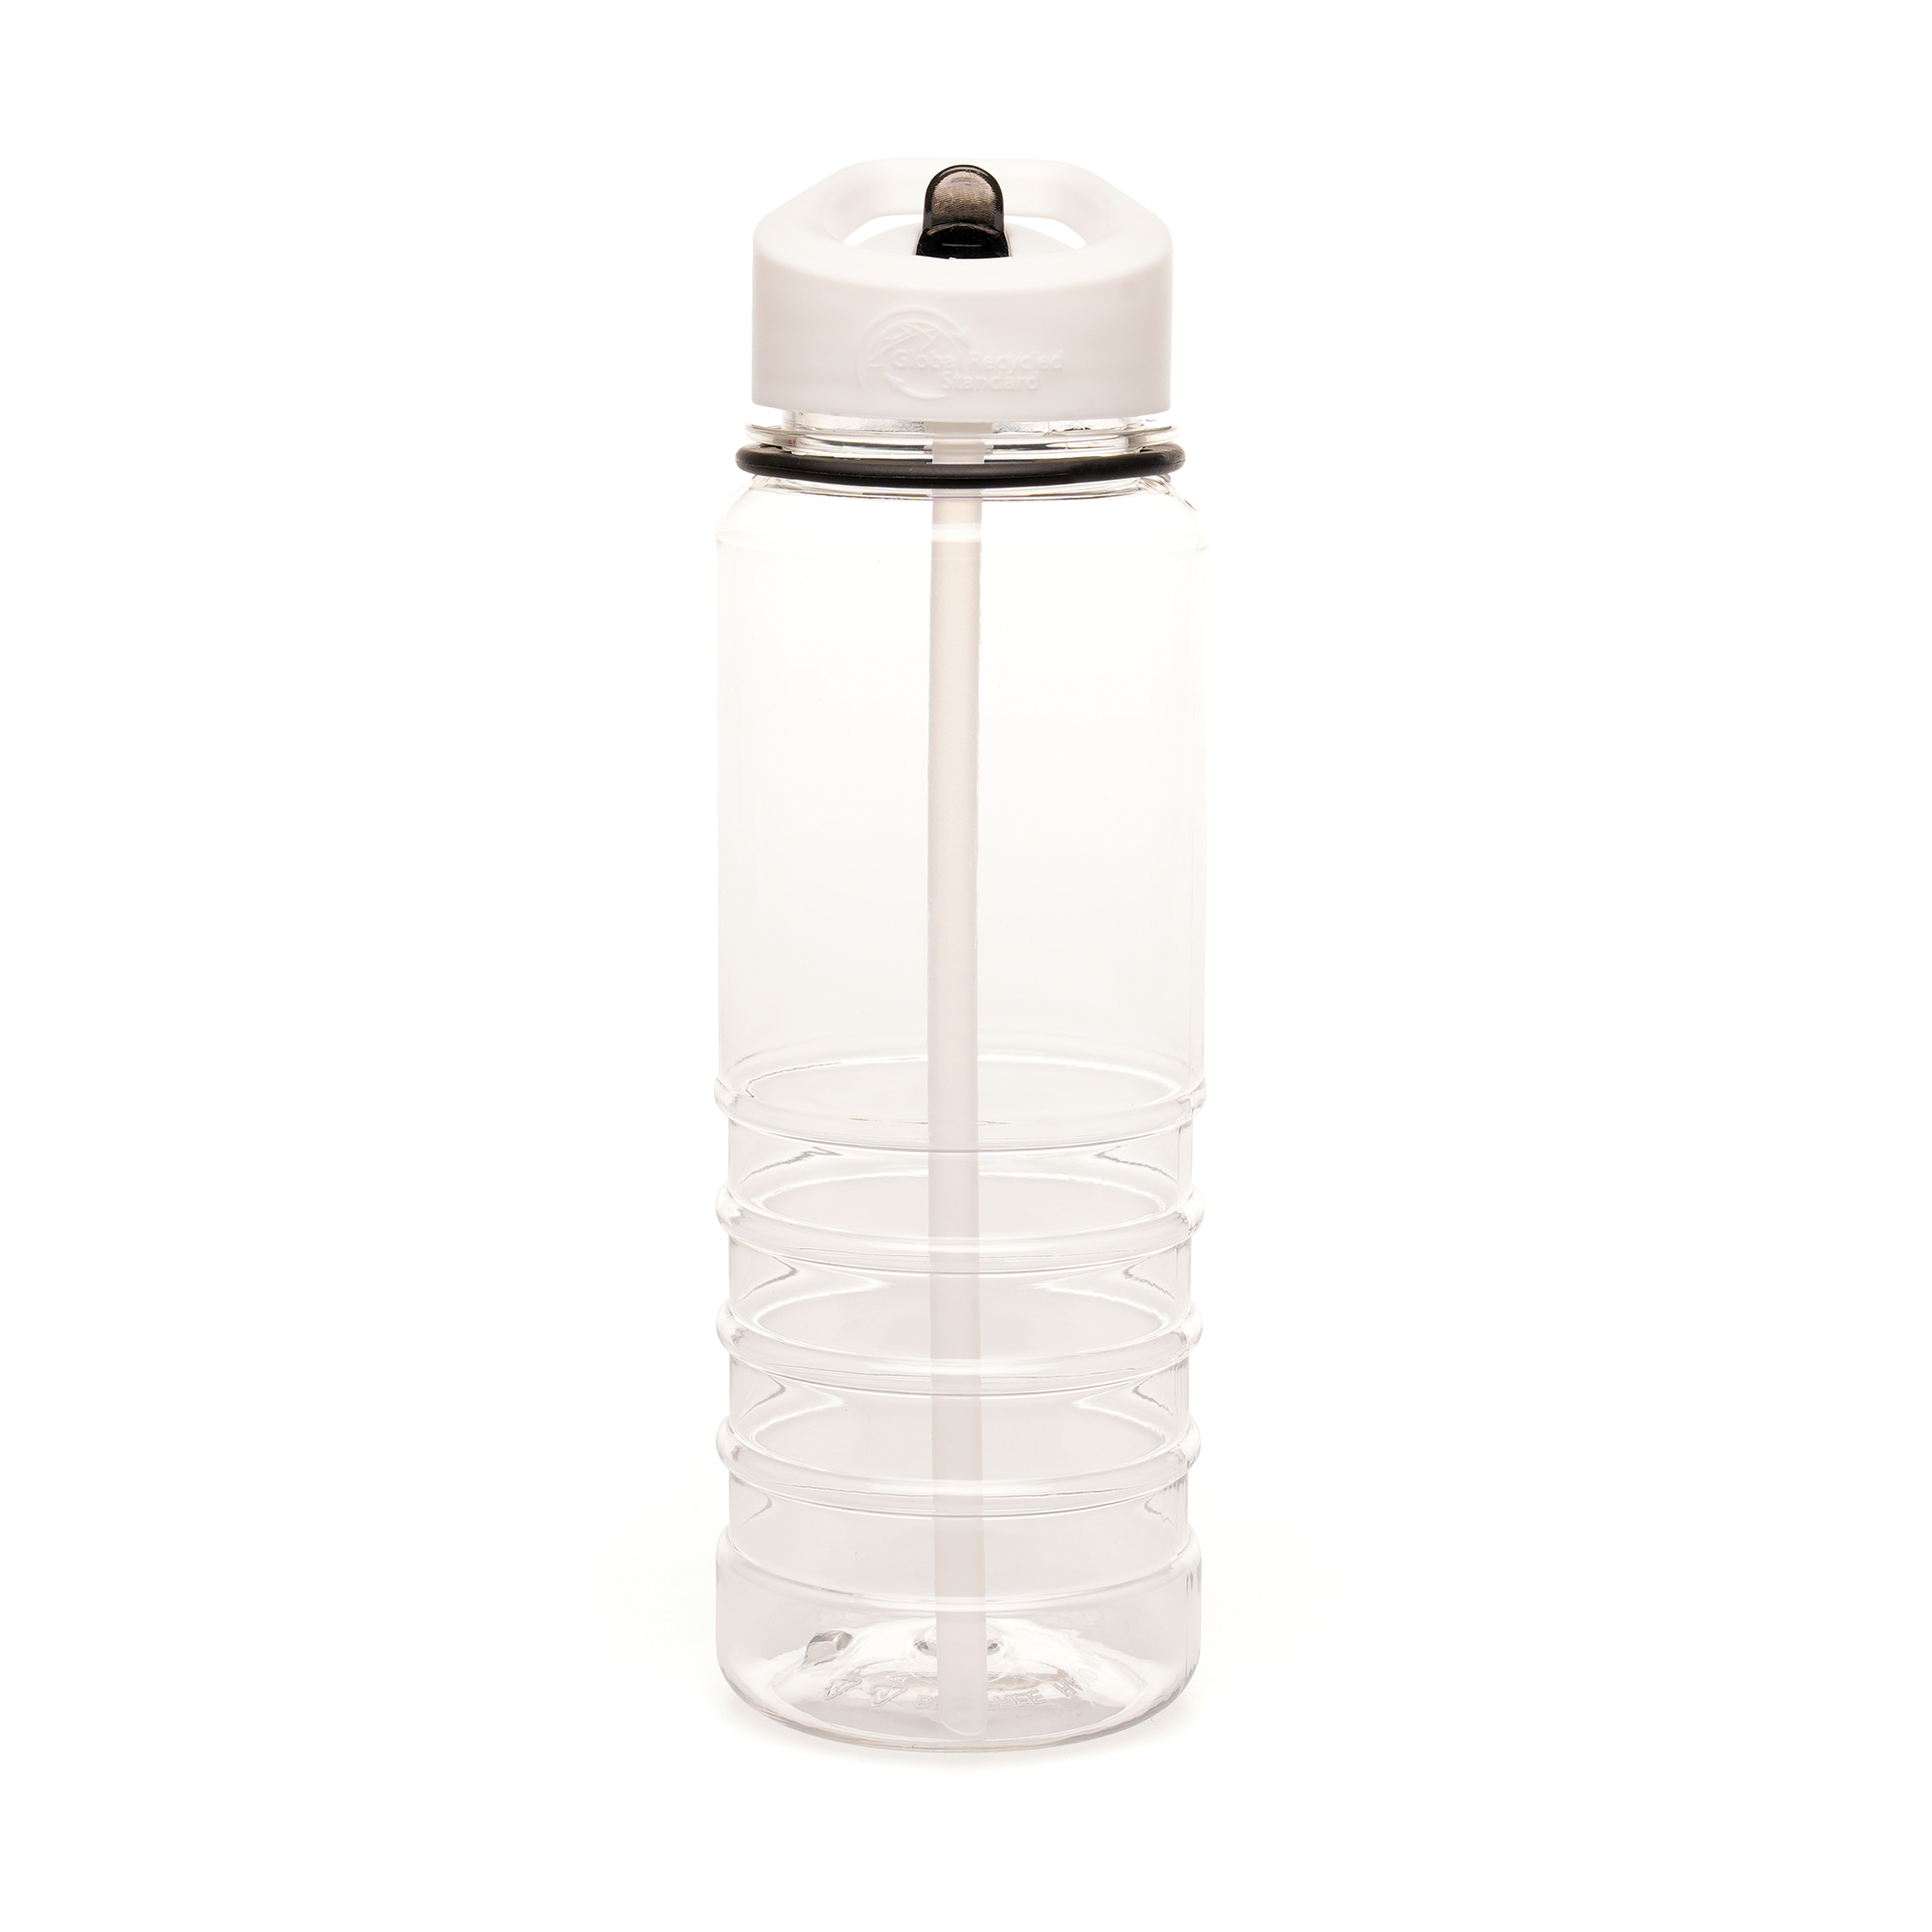 MG8606BK - REVIVE 650ml RPET AND RECYLCED STAINLESS STEEL DRINKS BOTTLE